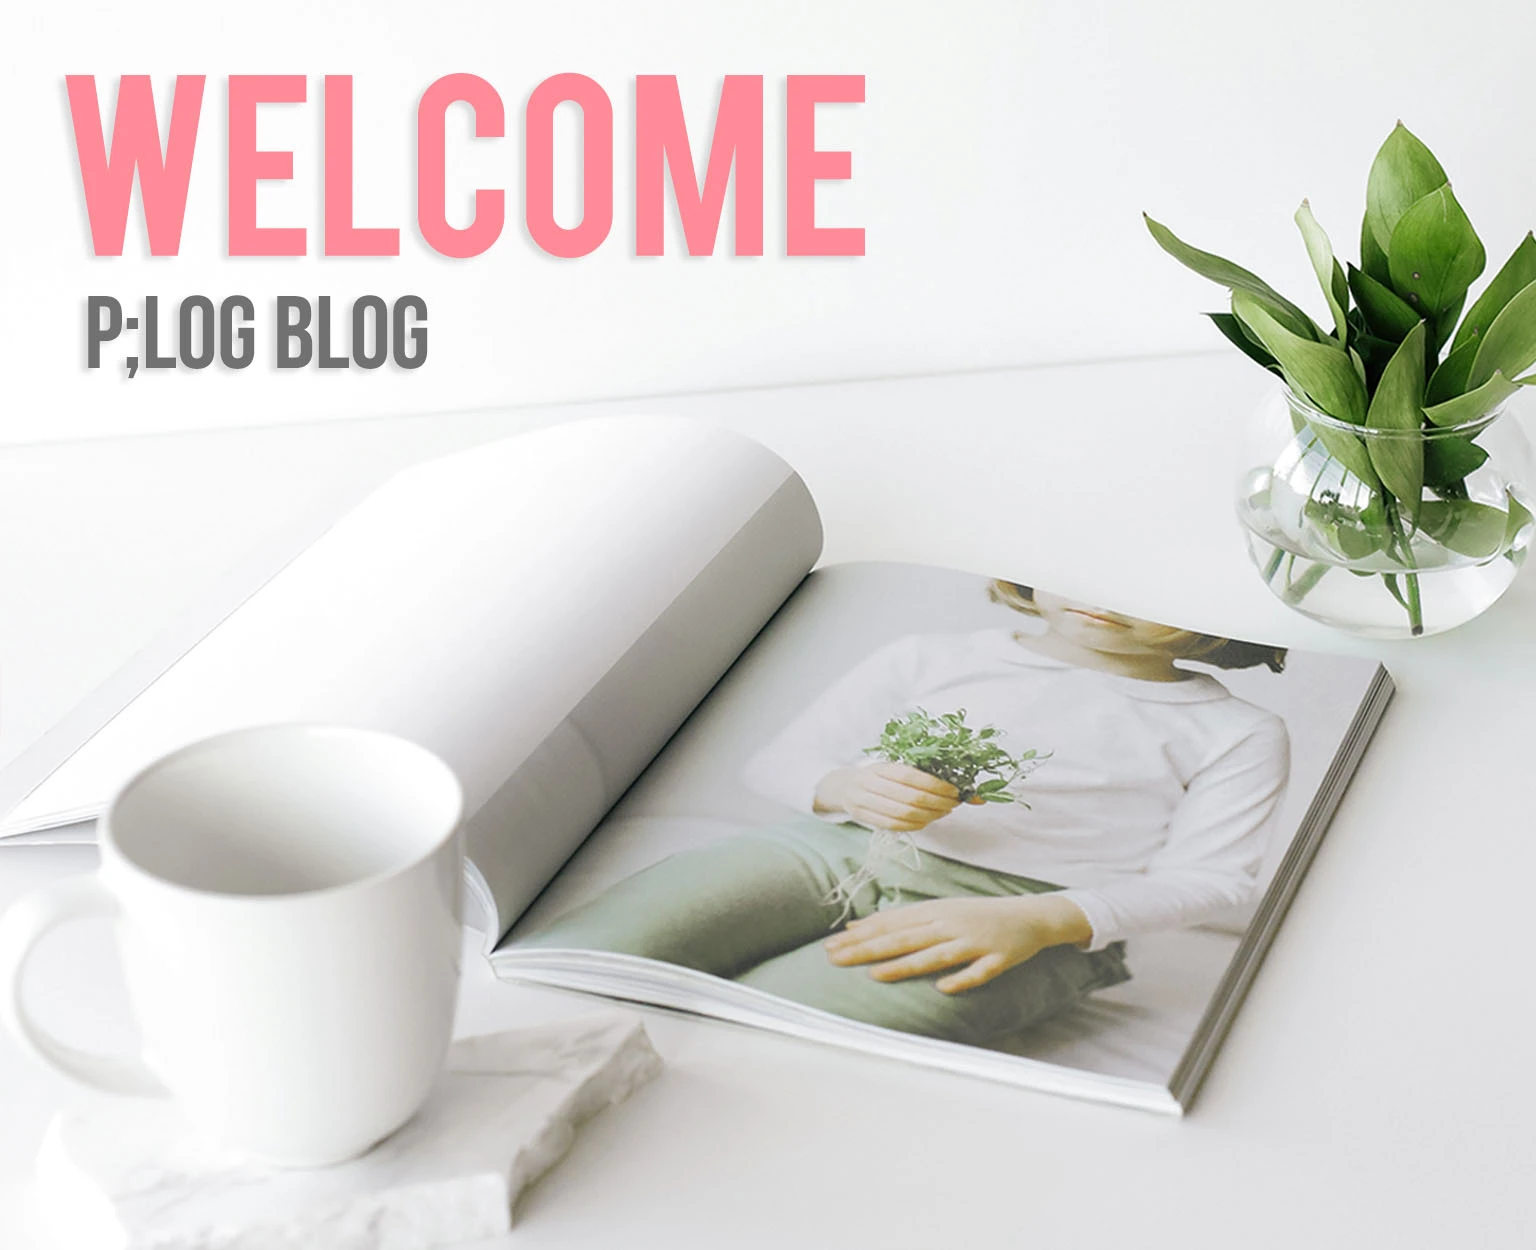 Welcome to p;log's blog!